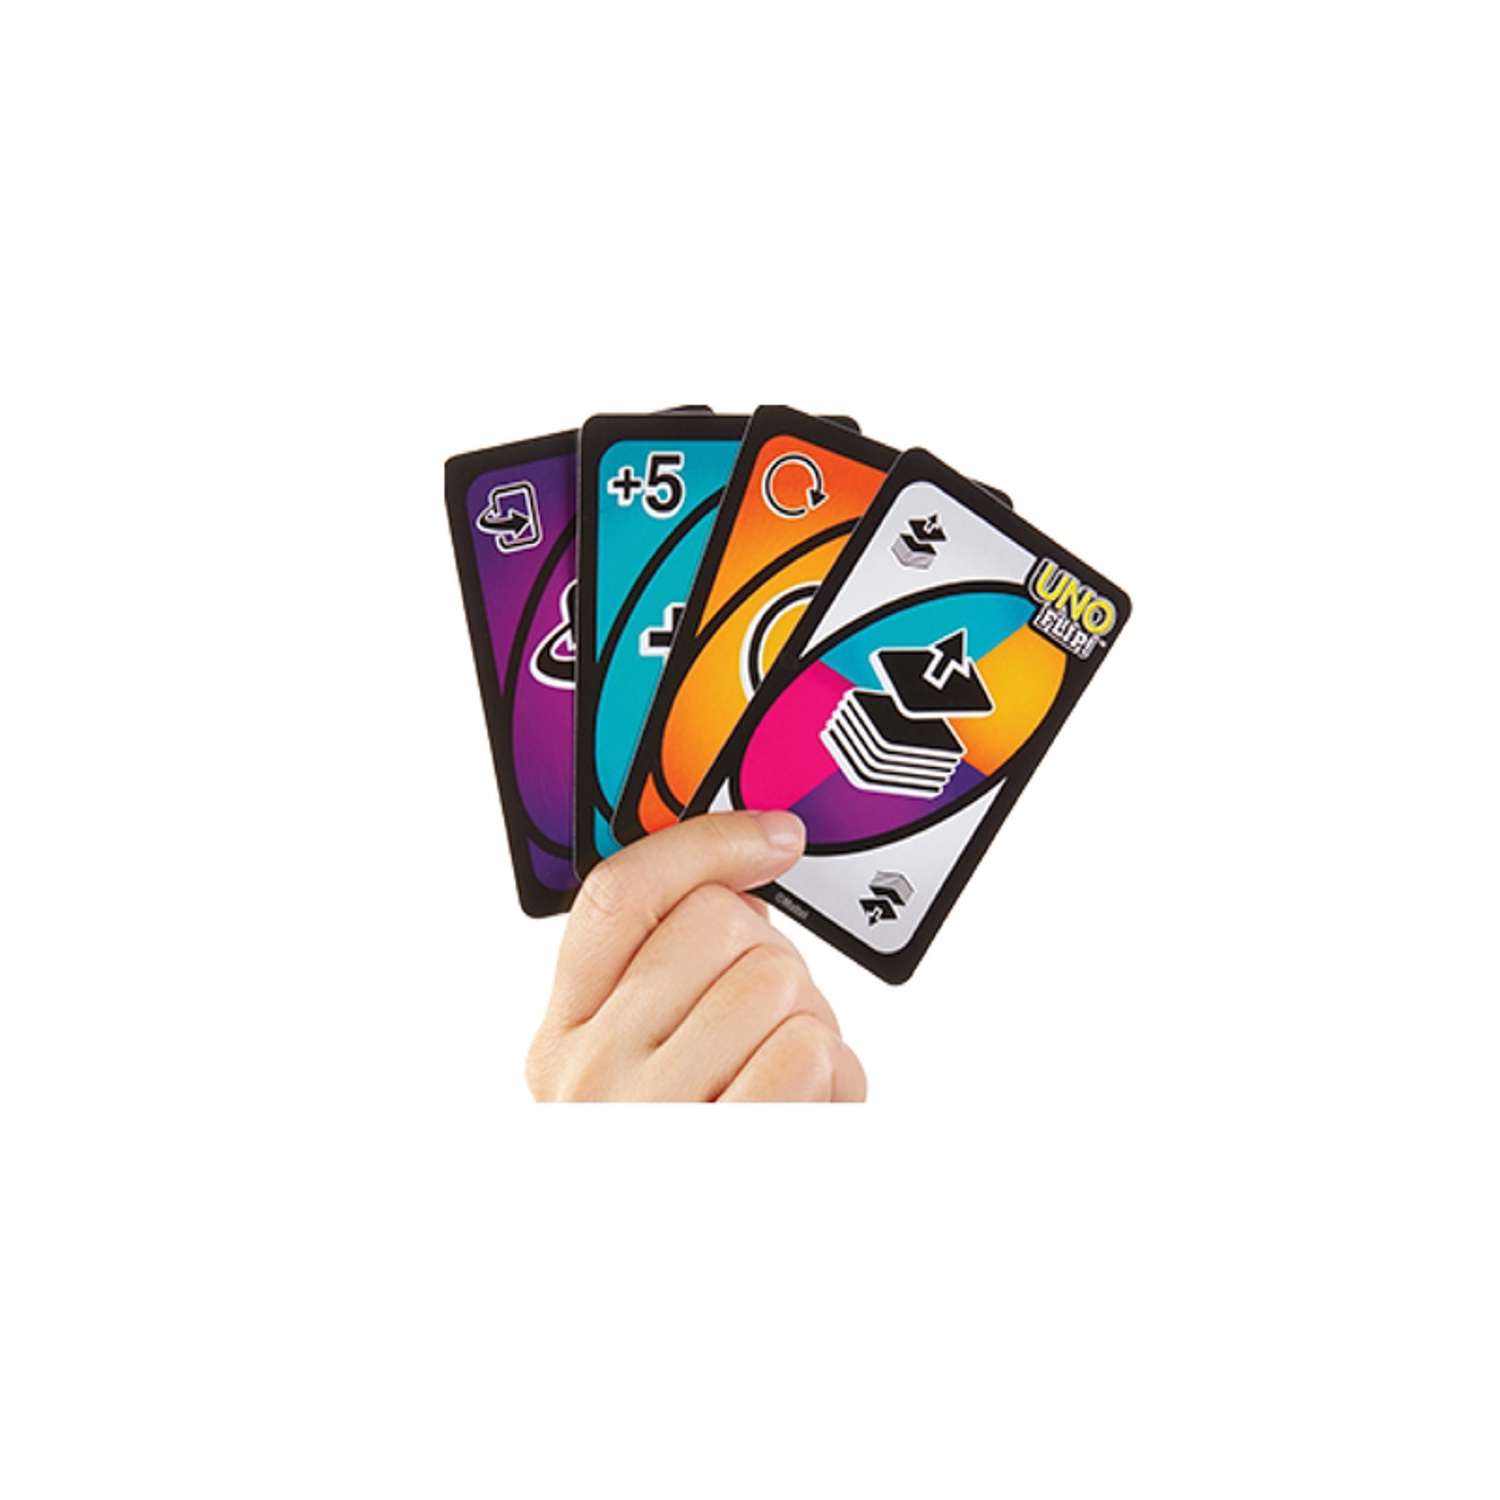 Uno Flip! Card Game - New